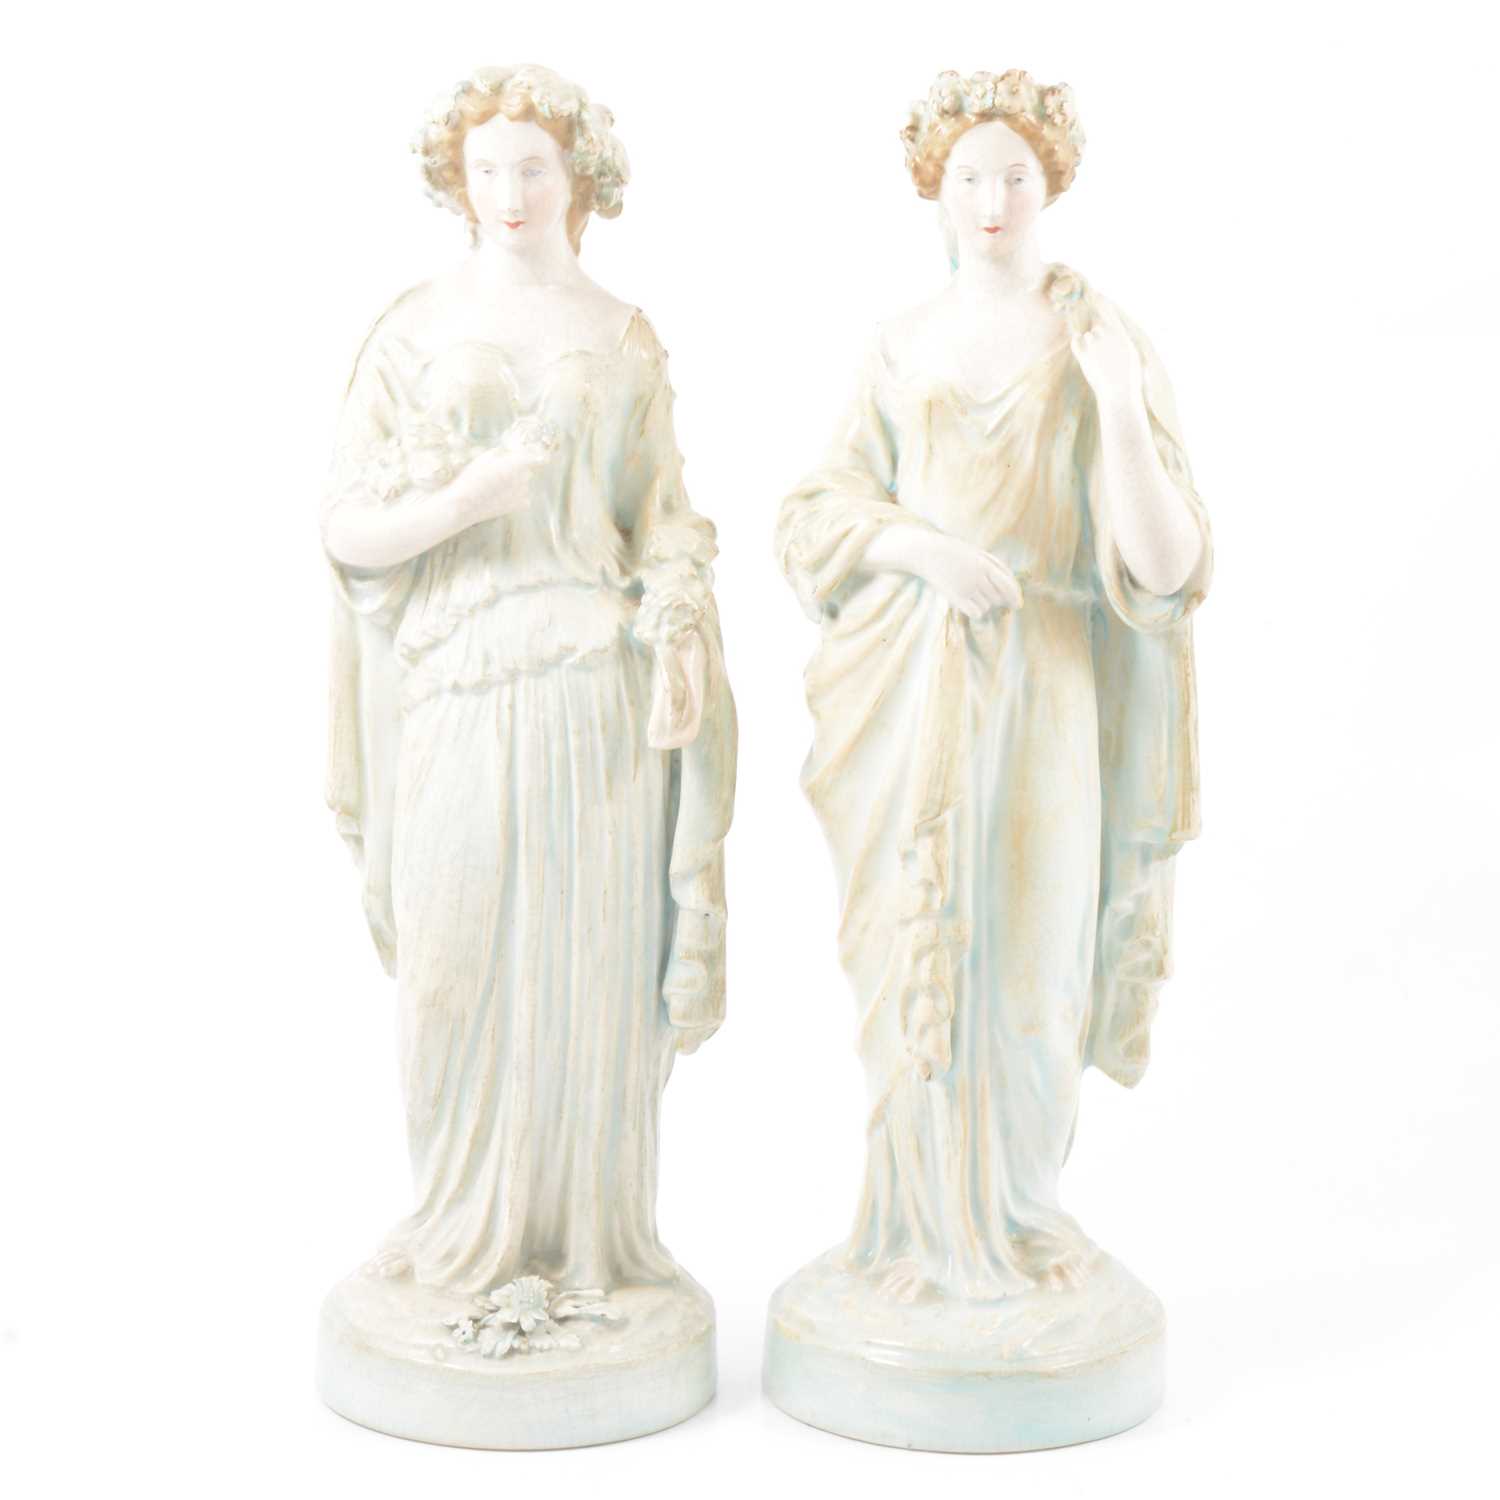 Lot 7 - Pair of Staffordshire earthenware figures